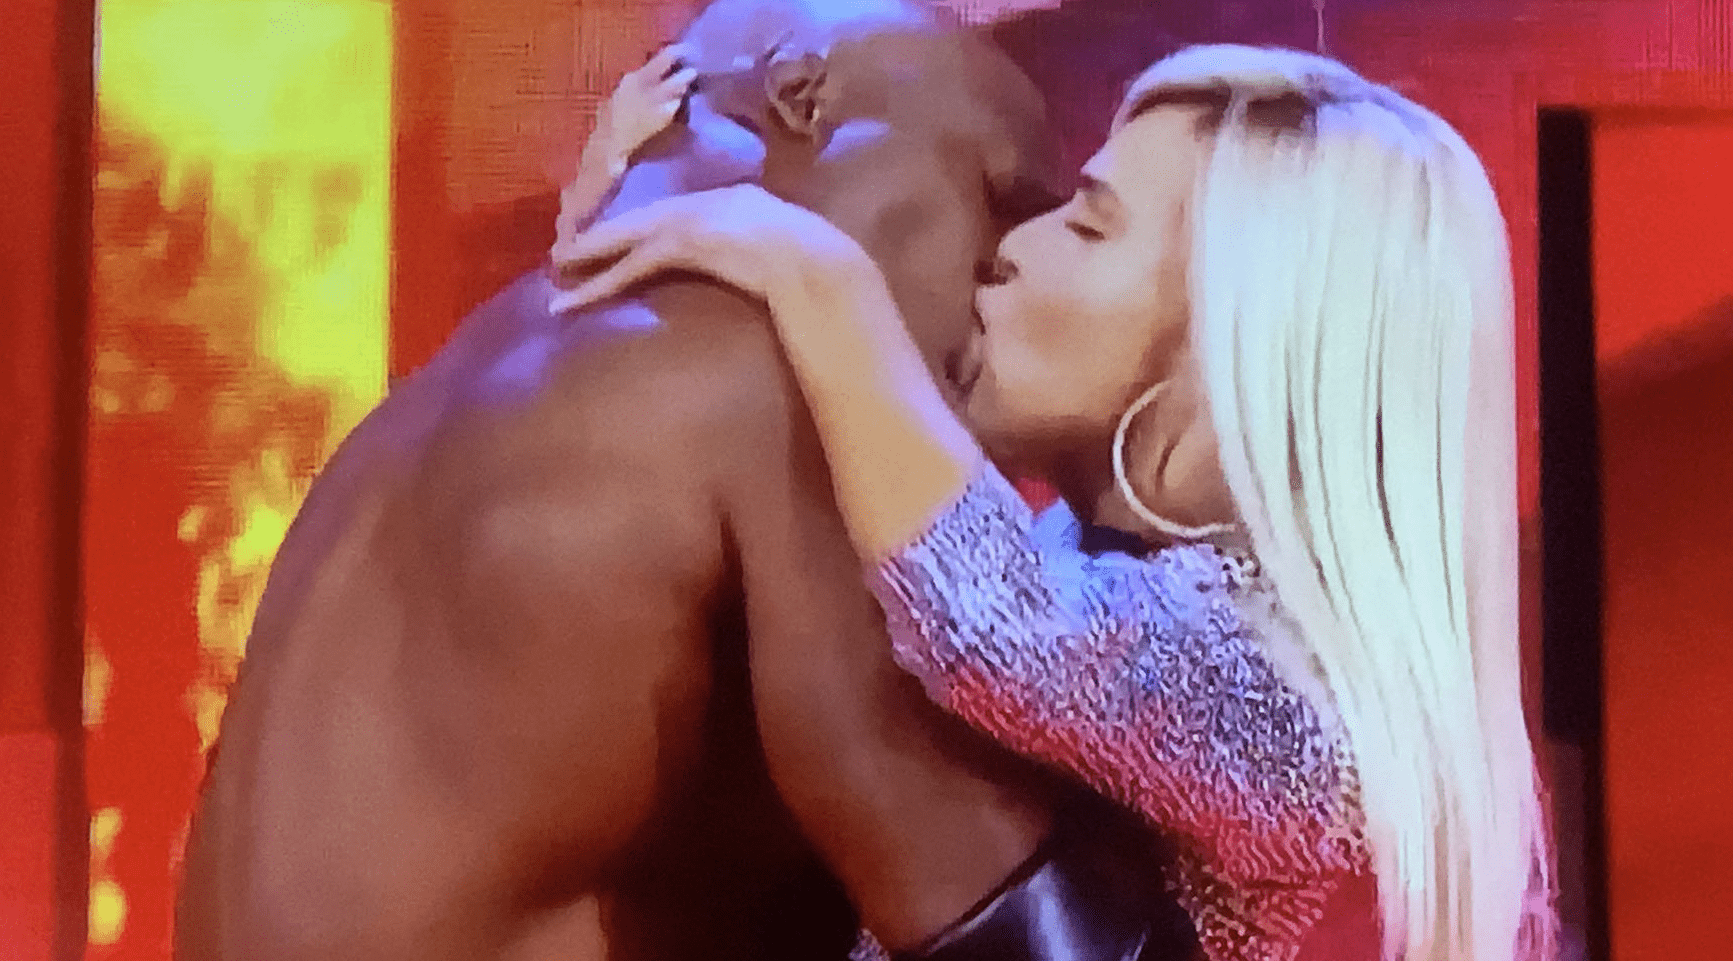 Lana & Bobby Lashley Return To WWE RAW & Make Out In Front Of Rusev